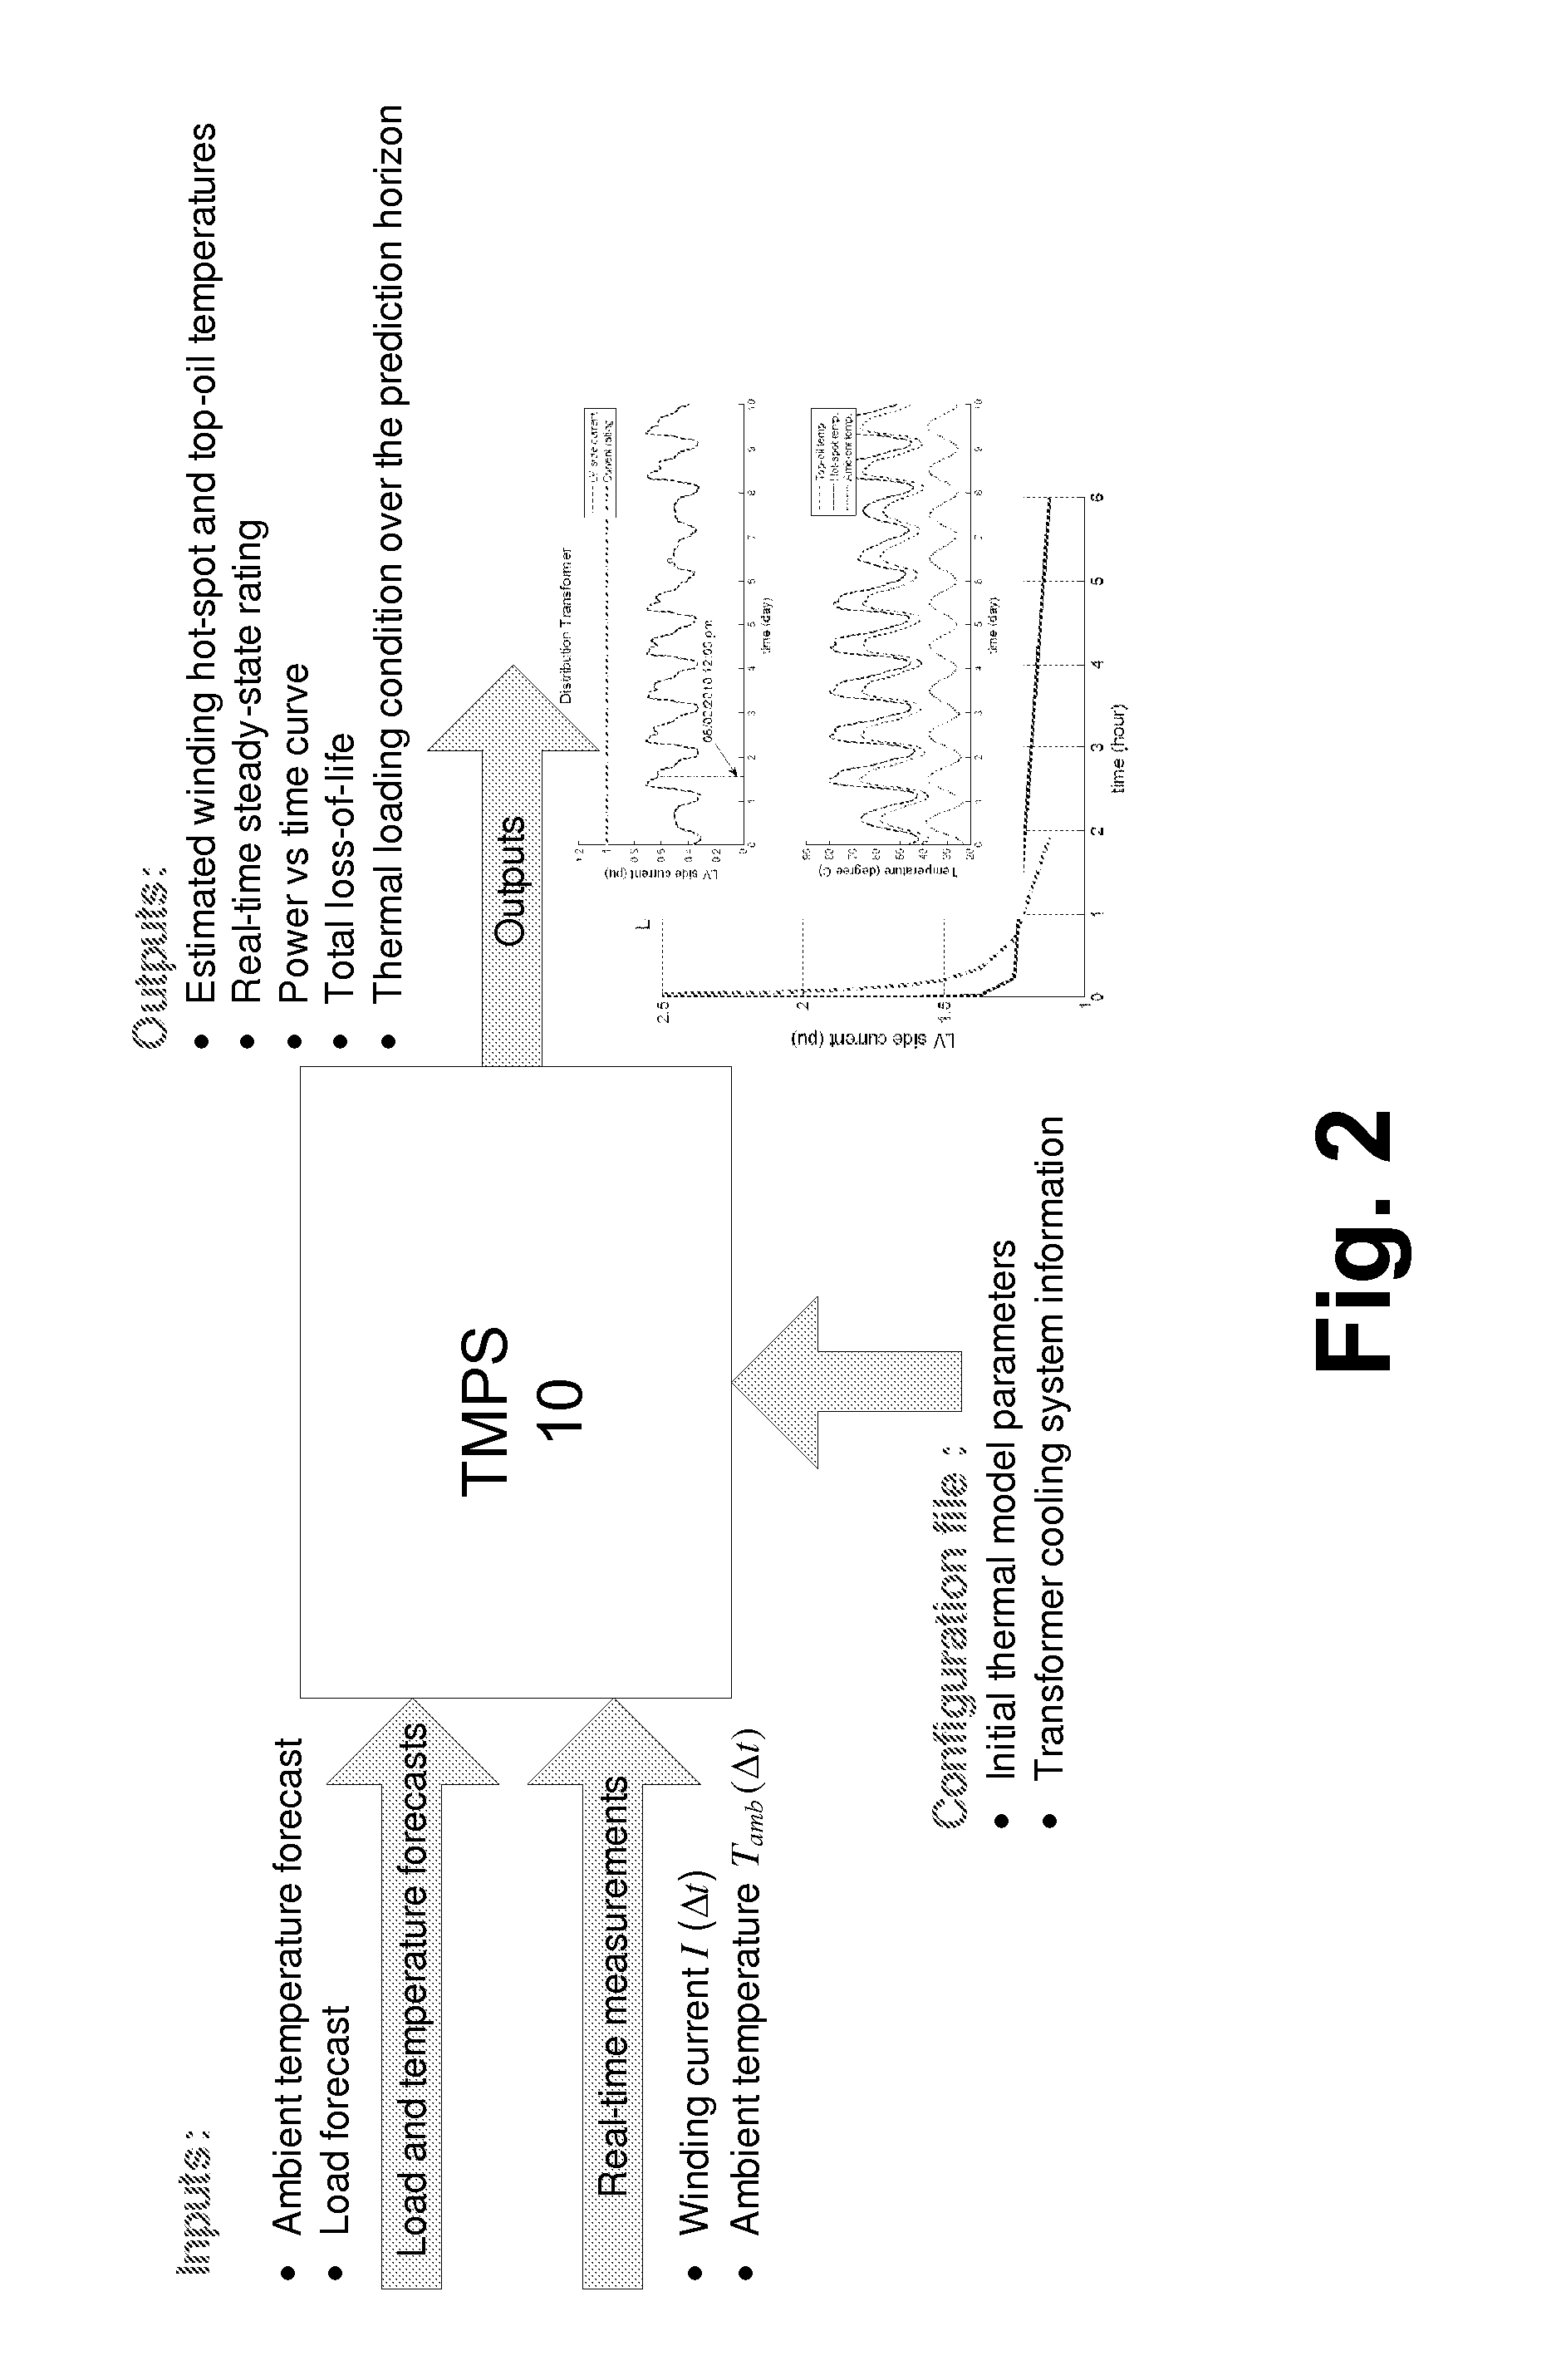 Oil-immersed transformer thermal monitoring and prediction system